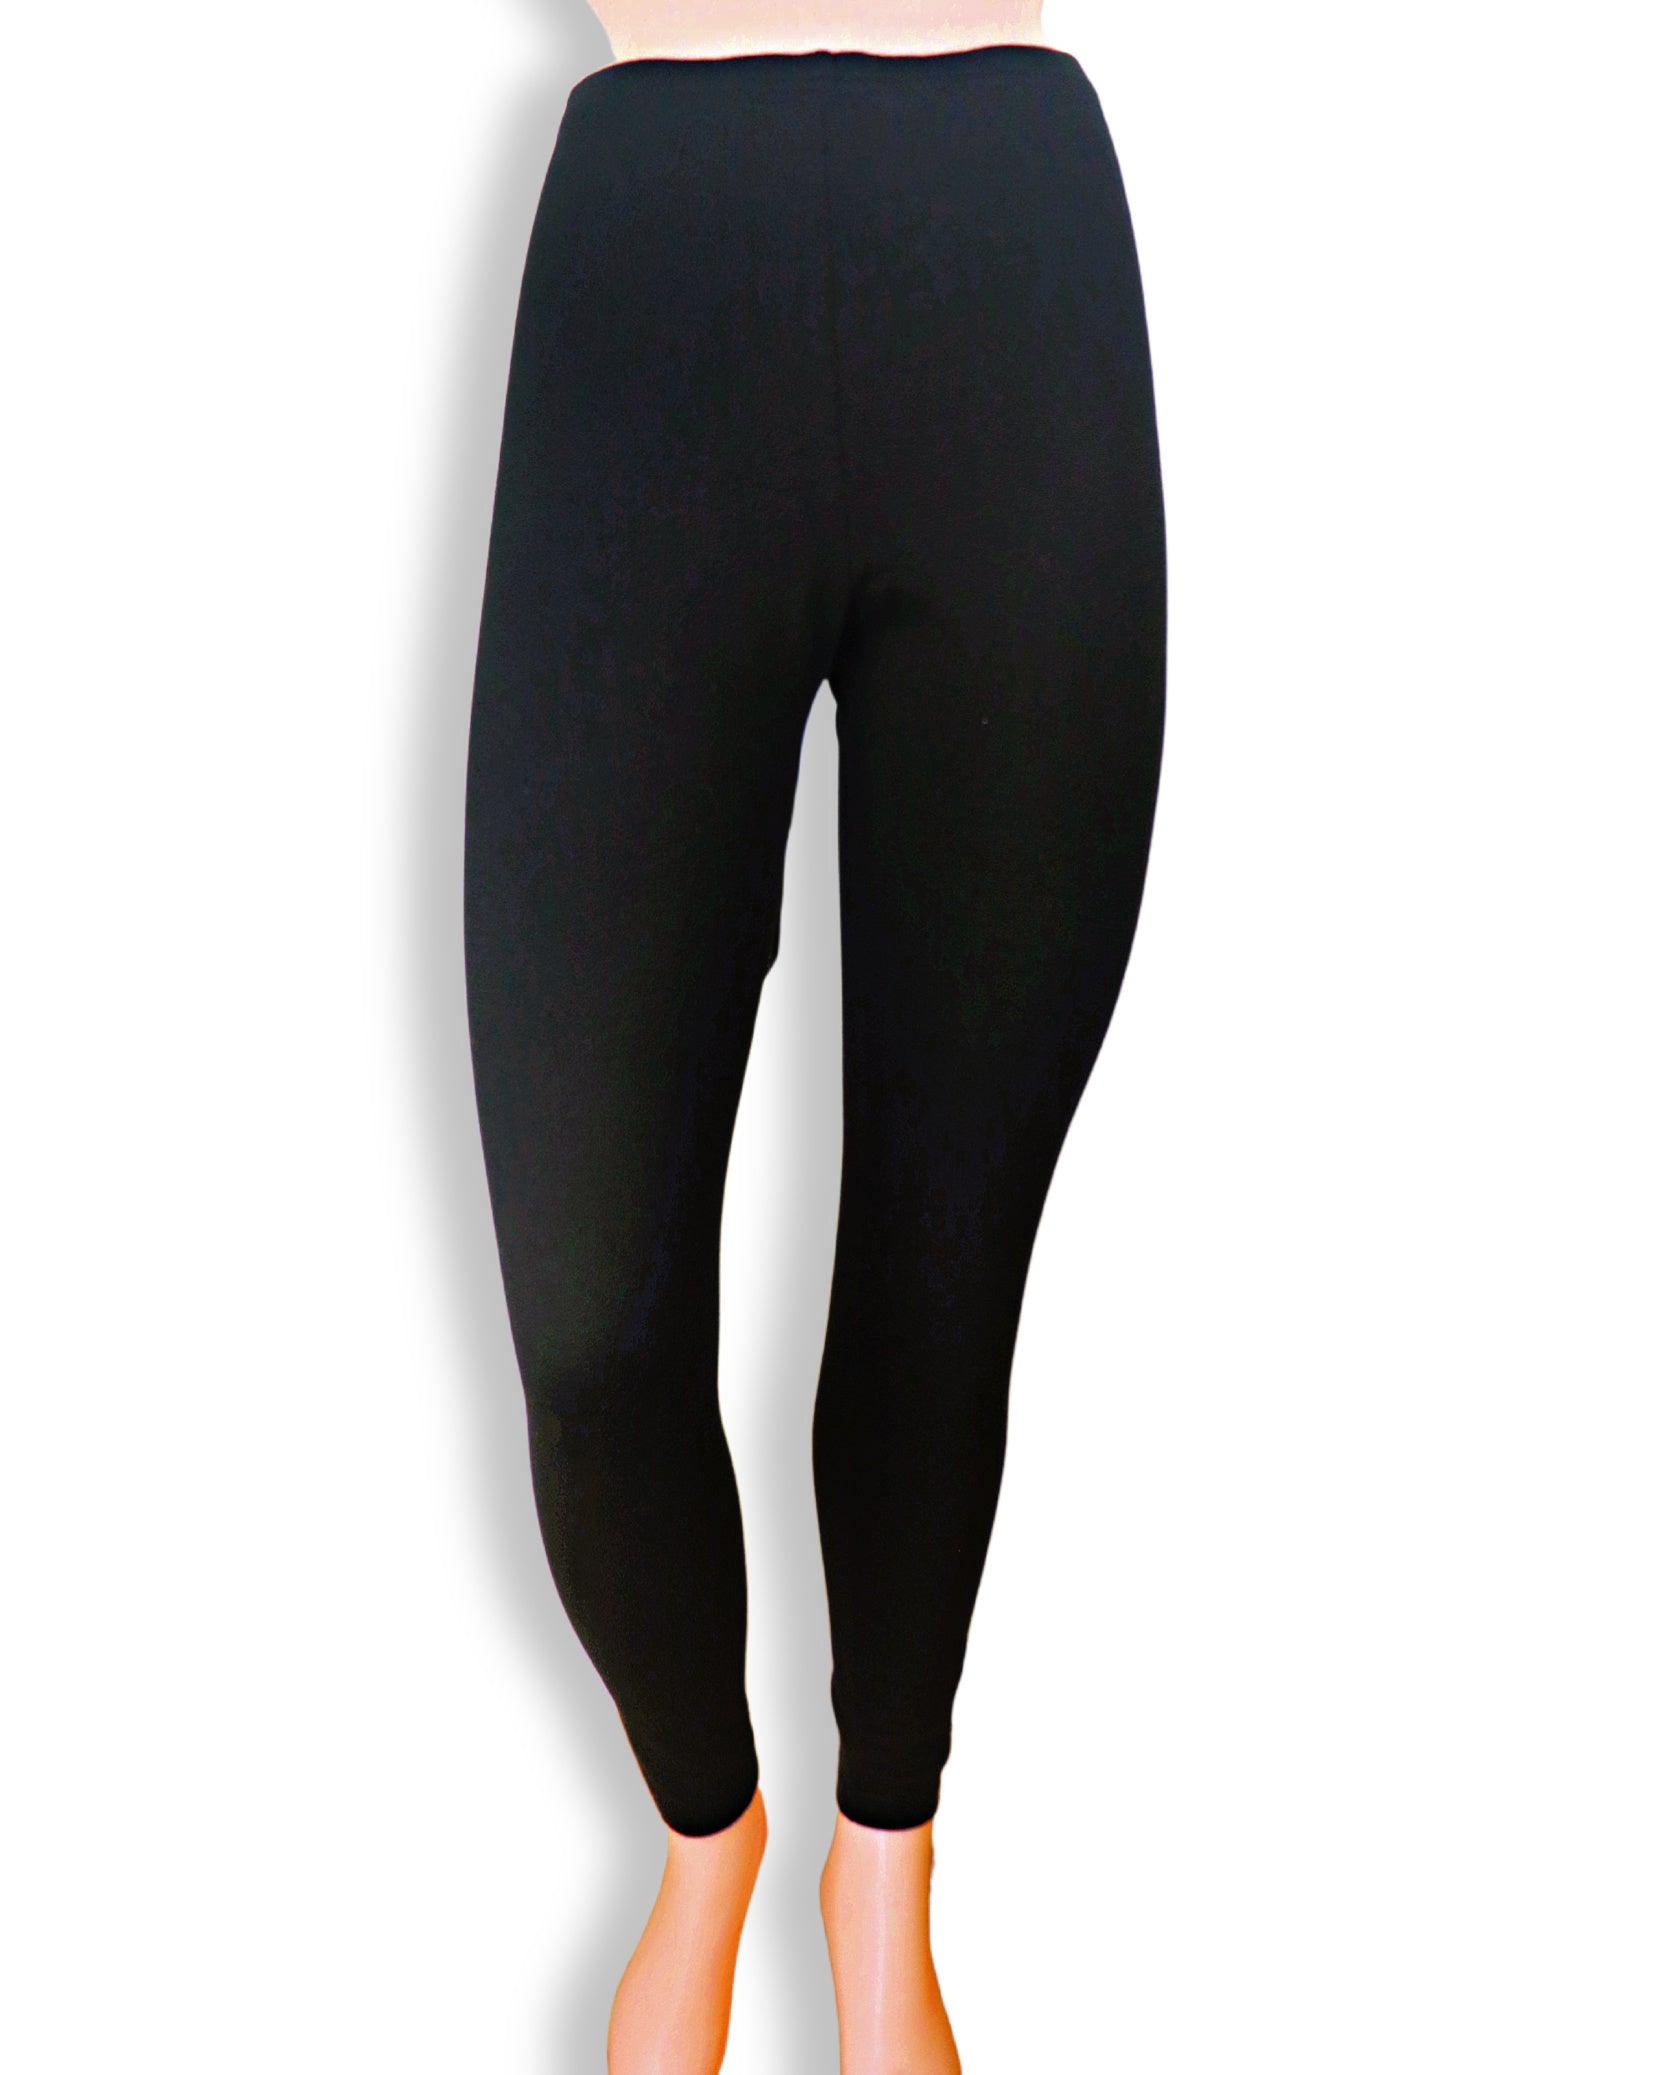 Leggings For Sale Near Me Outlet Store